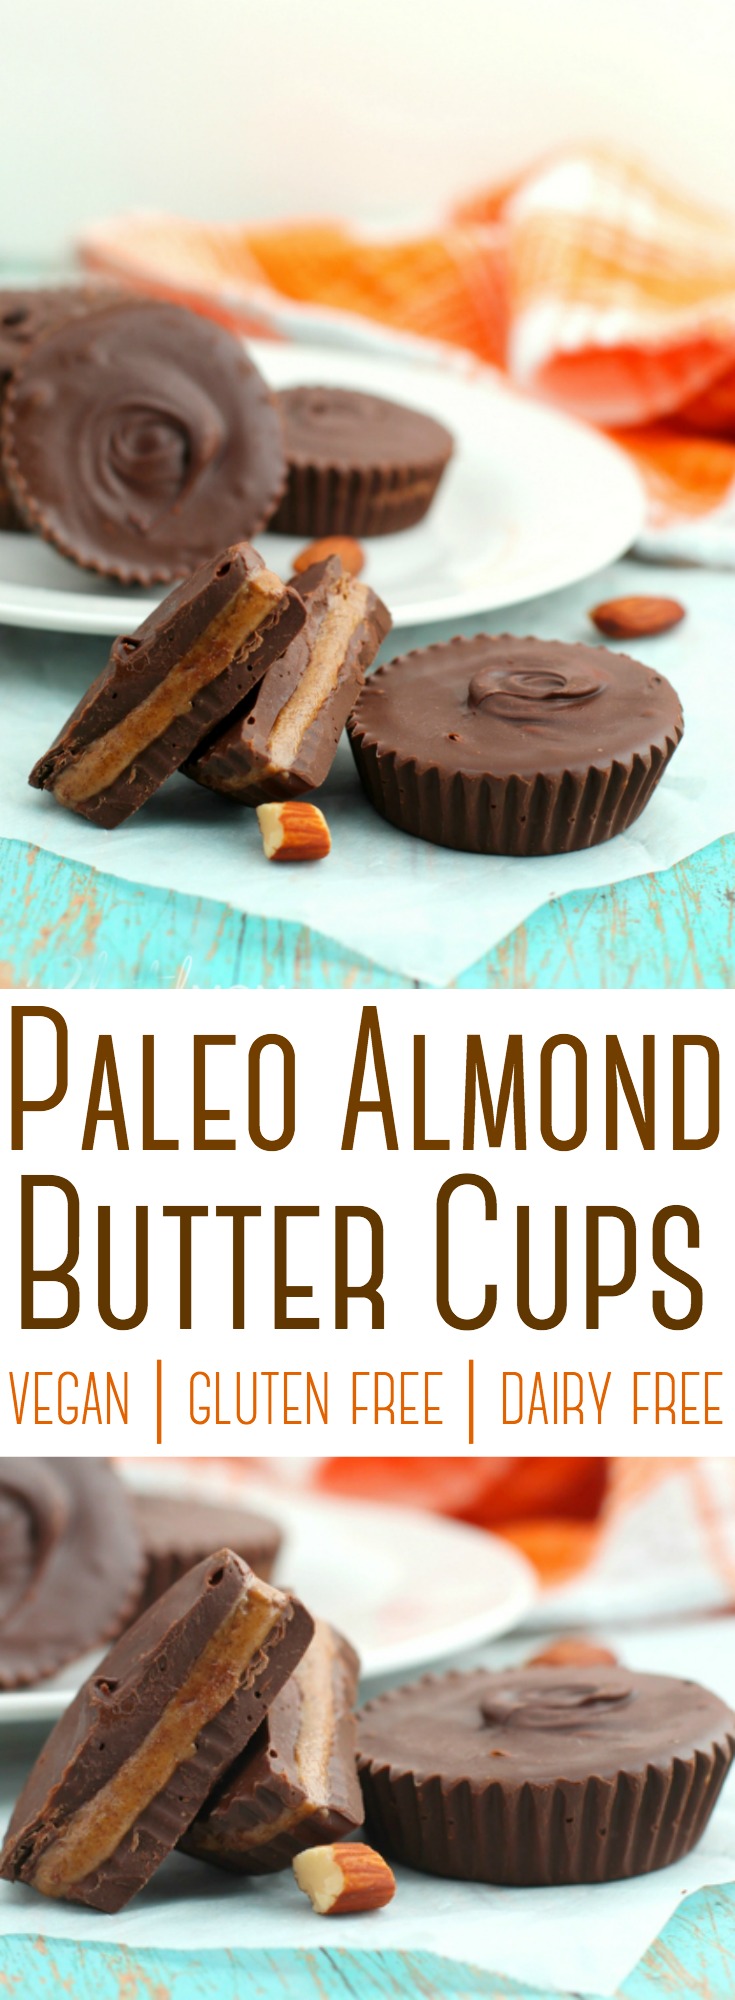 A simple recipe for rich and decadent paleo almond butter cups, easy to make with 5 simple ingredients - too good to resist! #healthy #peanutbutter #cups #almond 